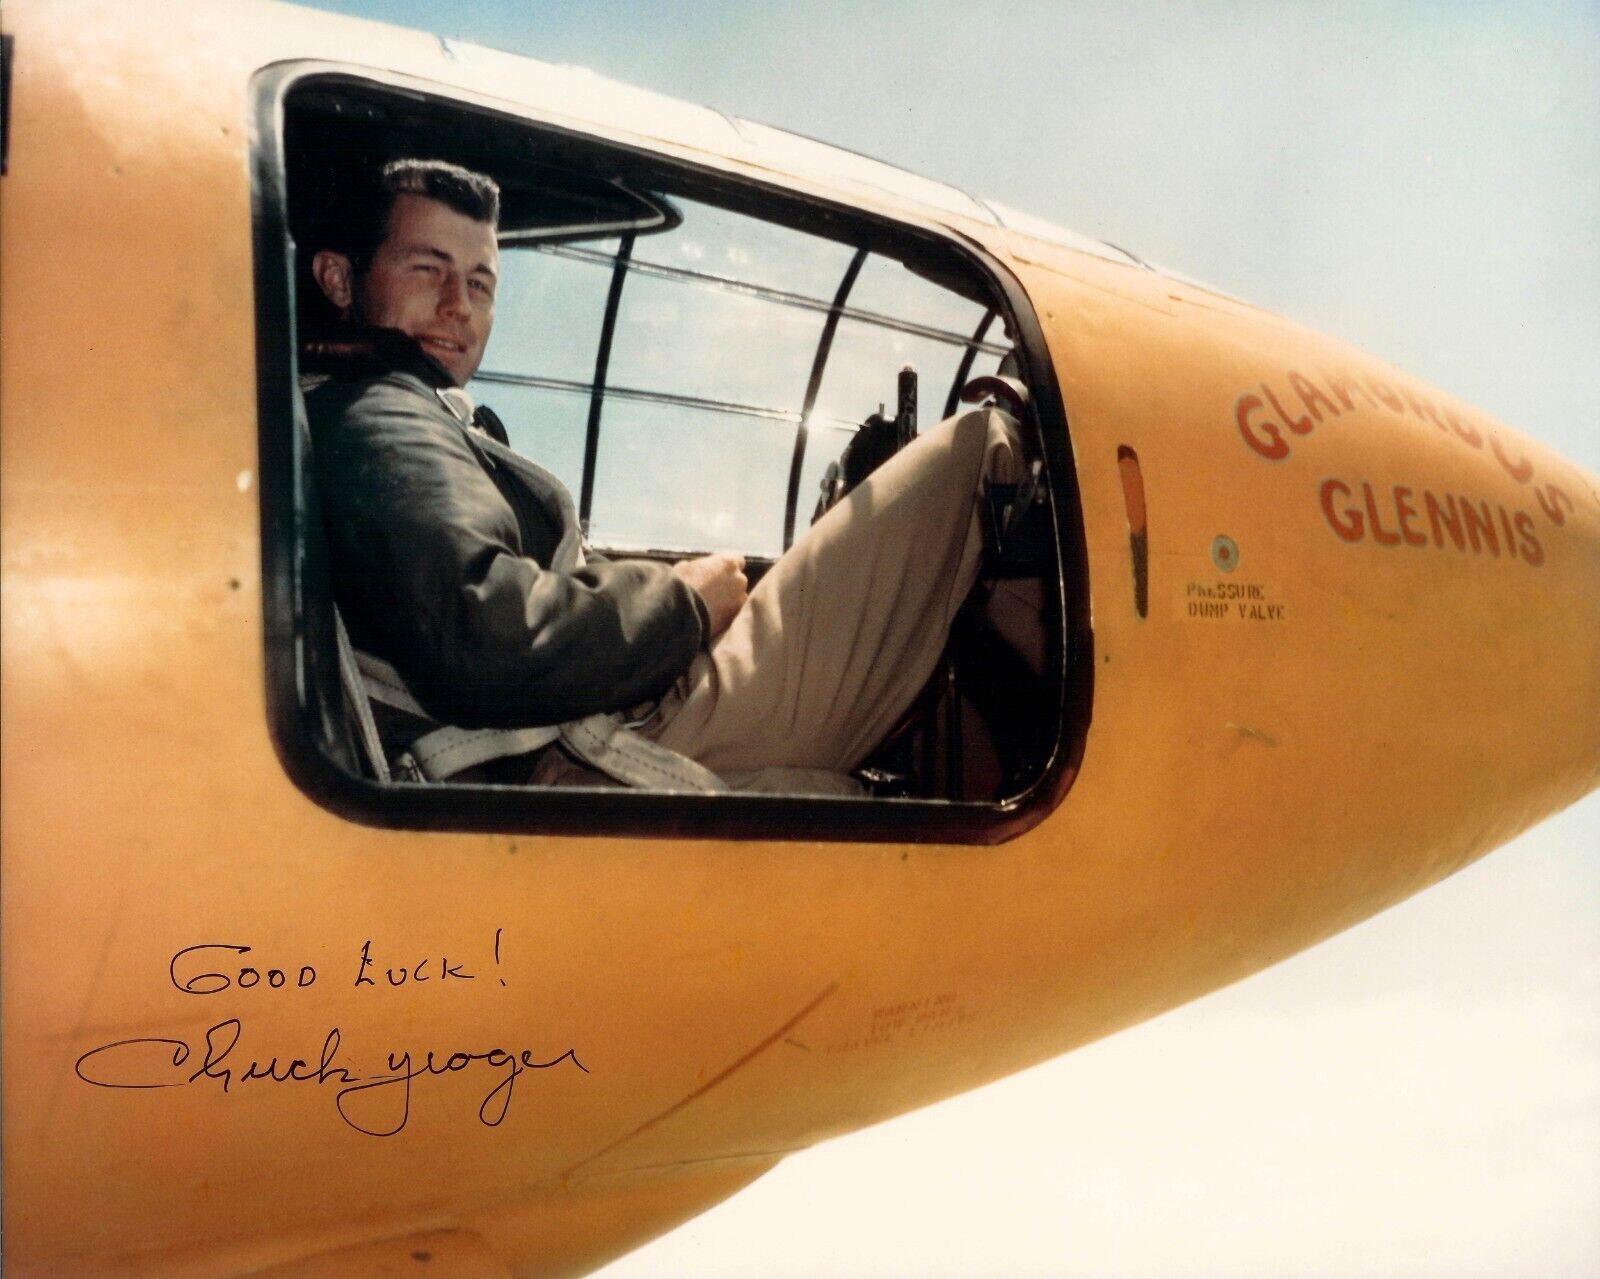 CAPTAIN CHUCK YEAGER IN BELL X-1 COCKPIT GLAMOROUS GLENNIS - 8X10 PHOTO REPRINT